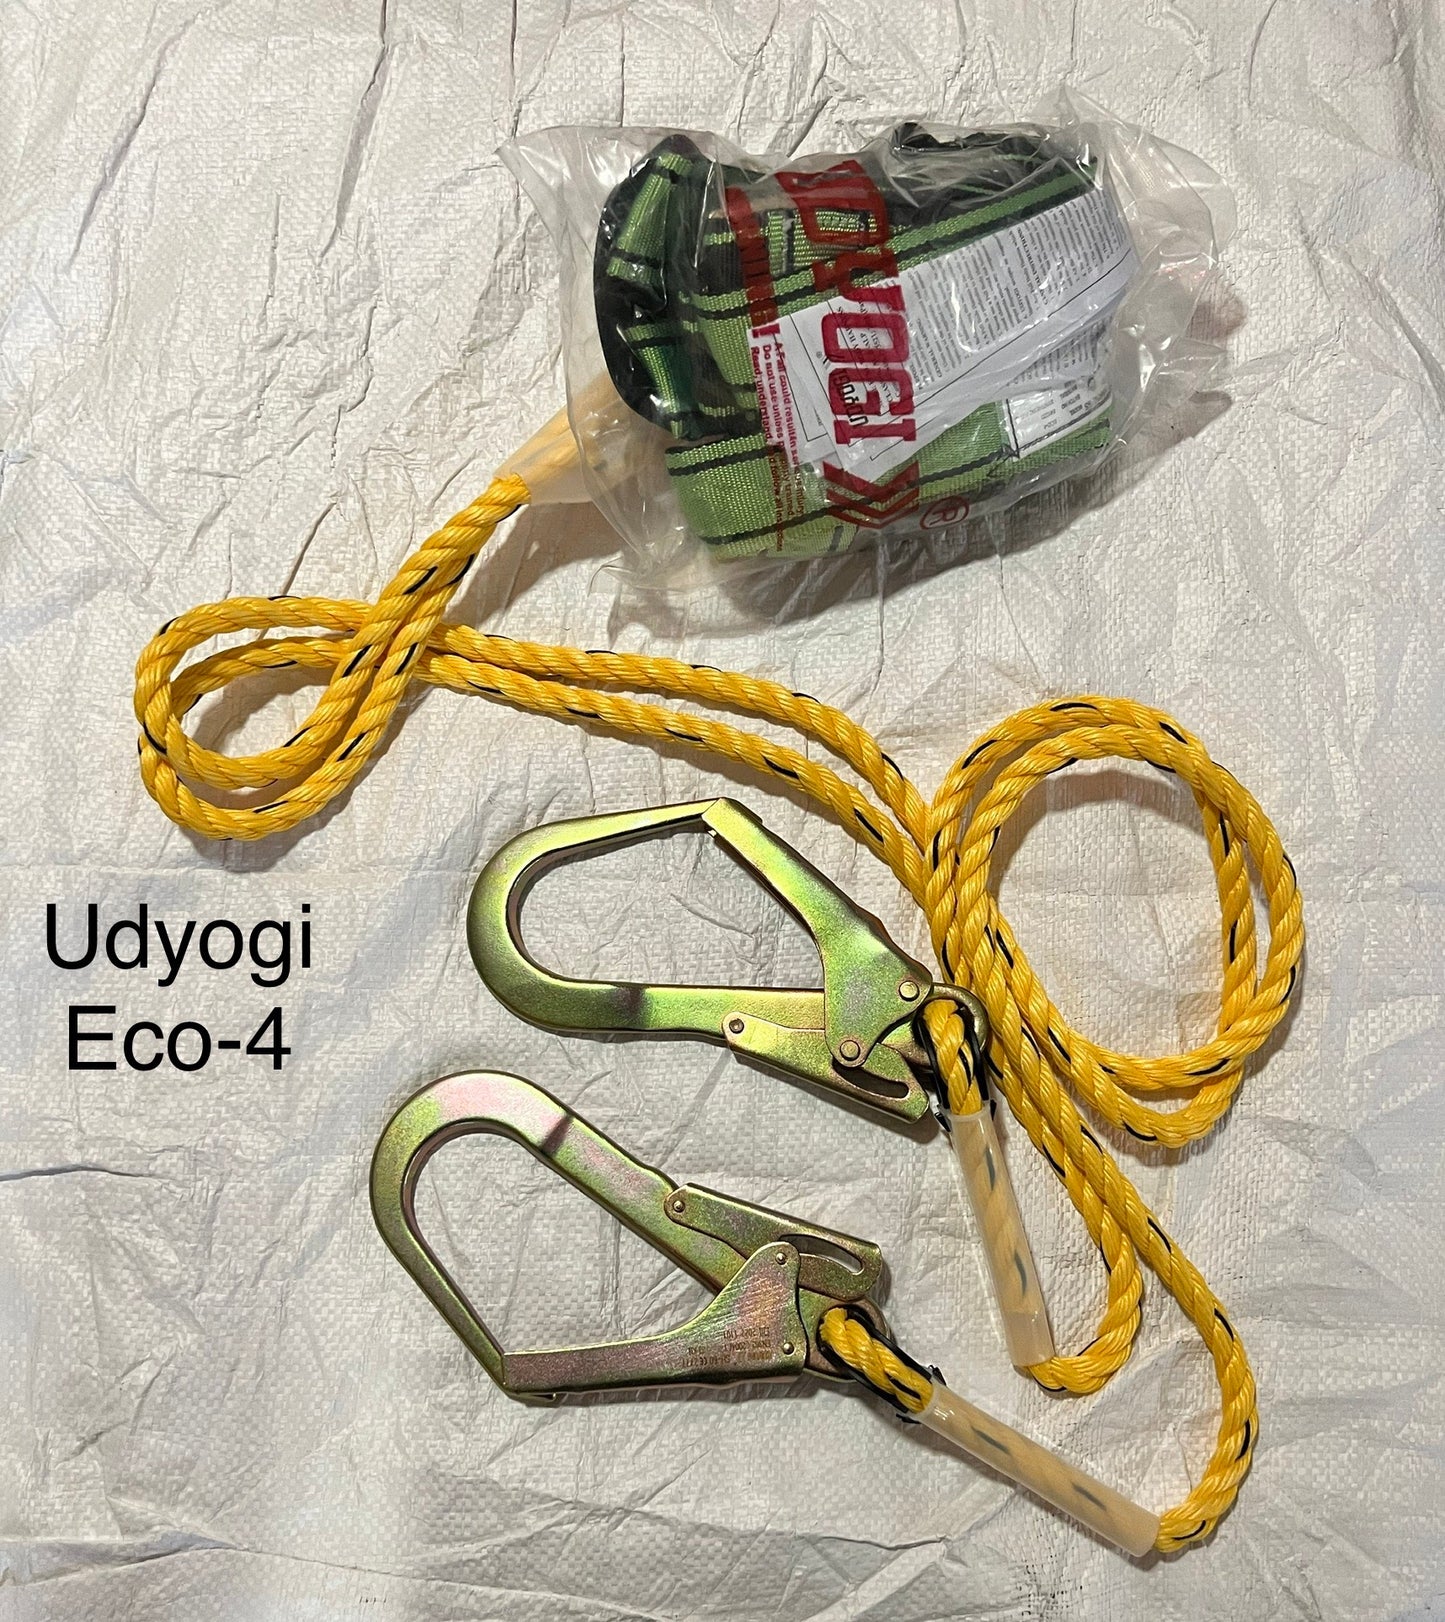 Udyogi Eco 4 Safety Harness Safety Belt with SH-60 Hook (discontinued) (Pack of 10)